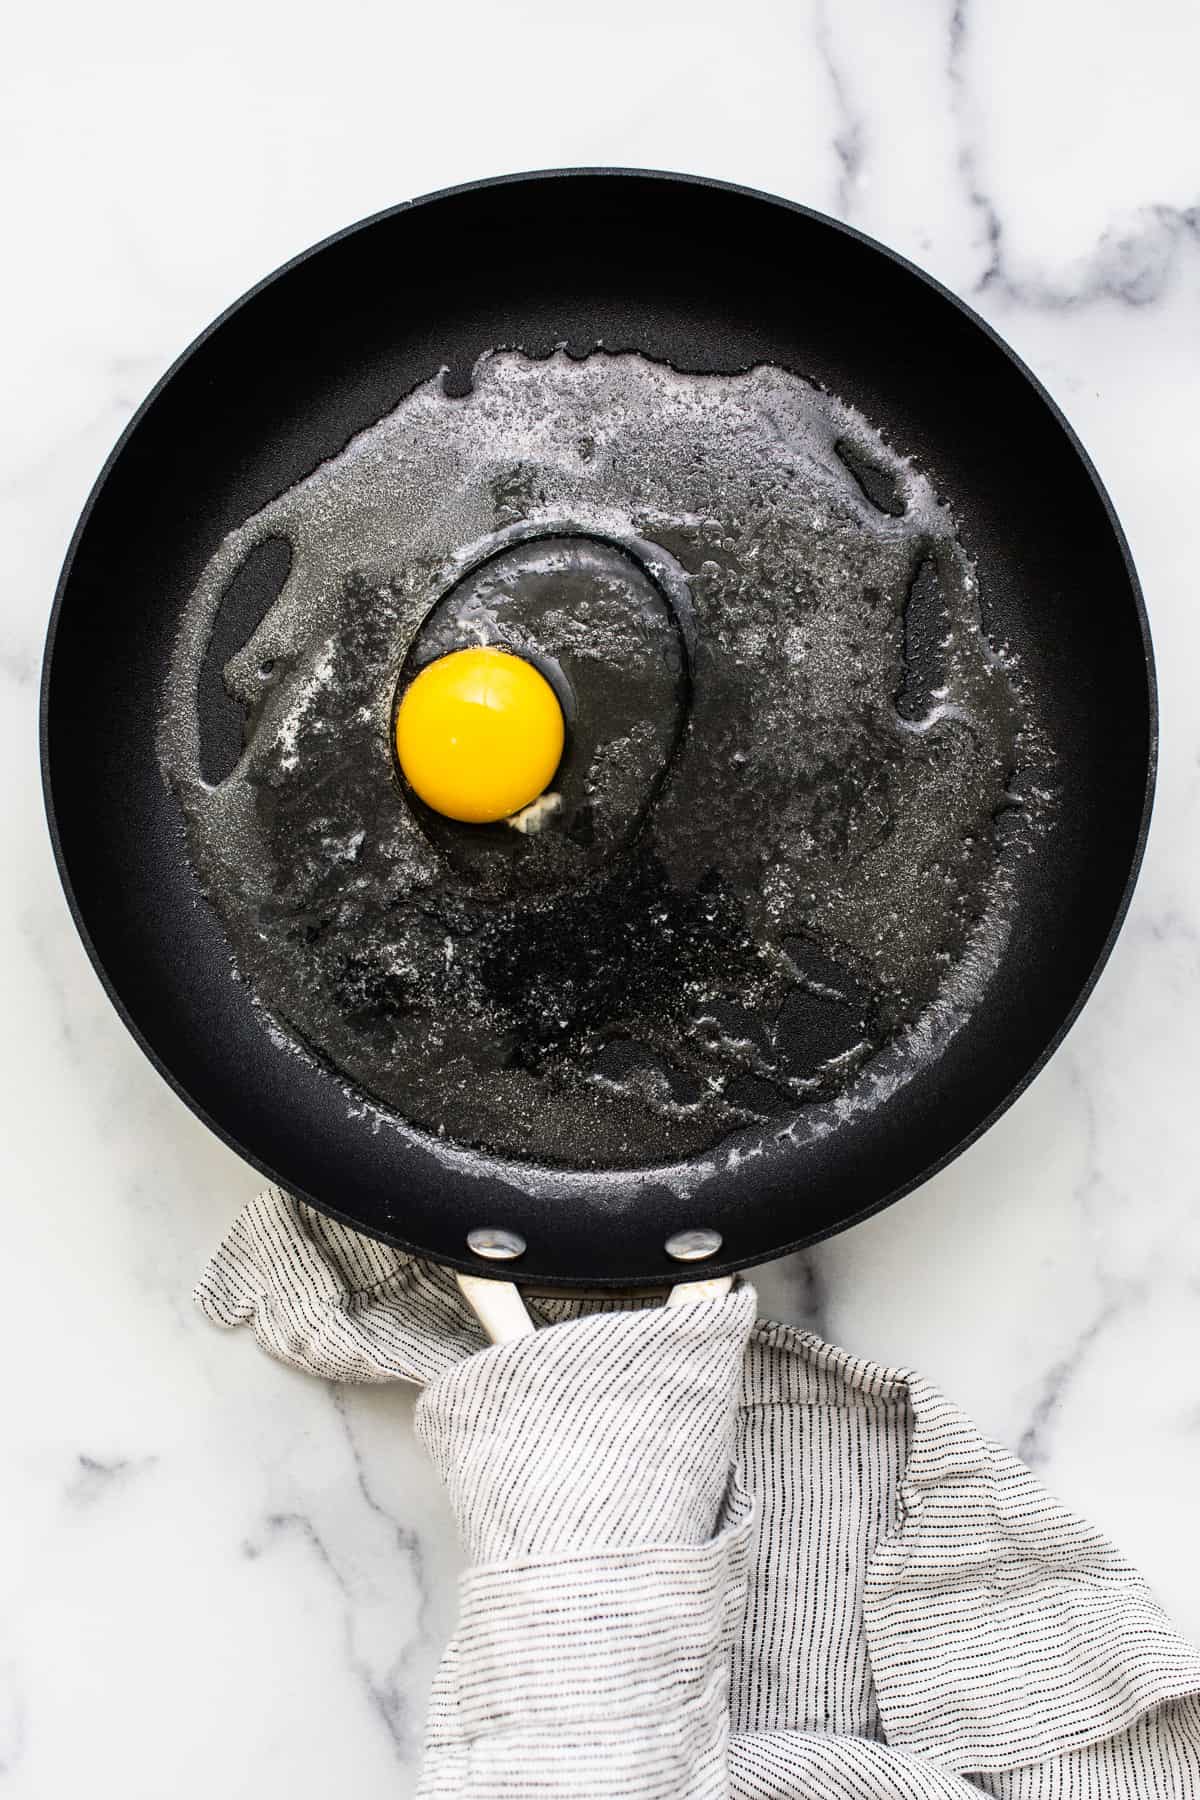 https://fitfoodiefinds.com/wp-content/uploads/2022/08/Sunny-Side-Up-Eggs-7.jpg